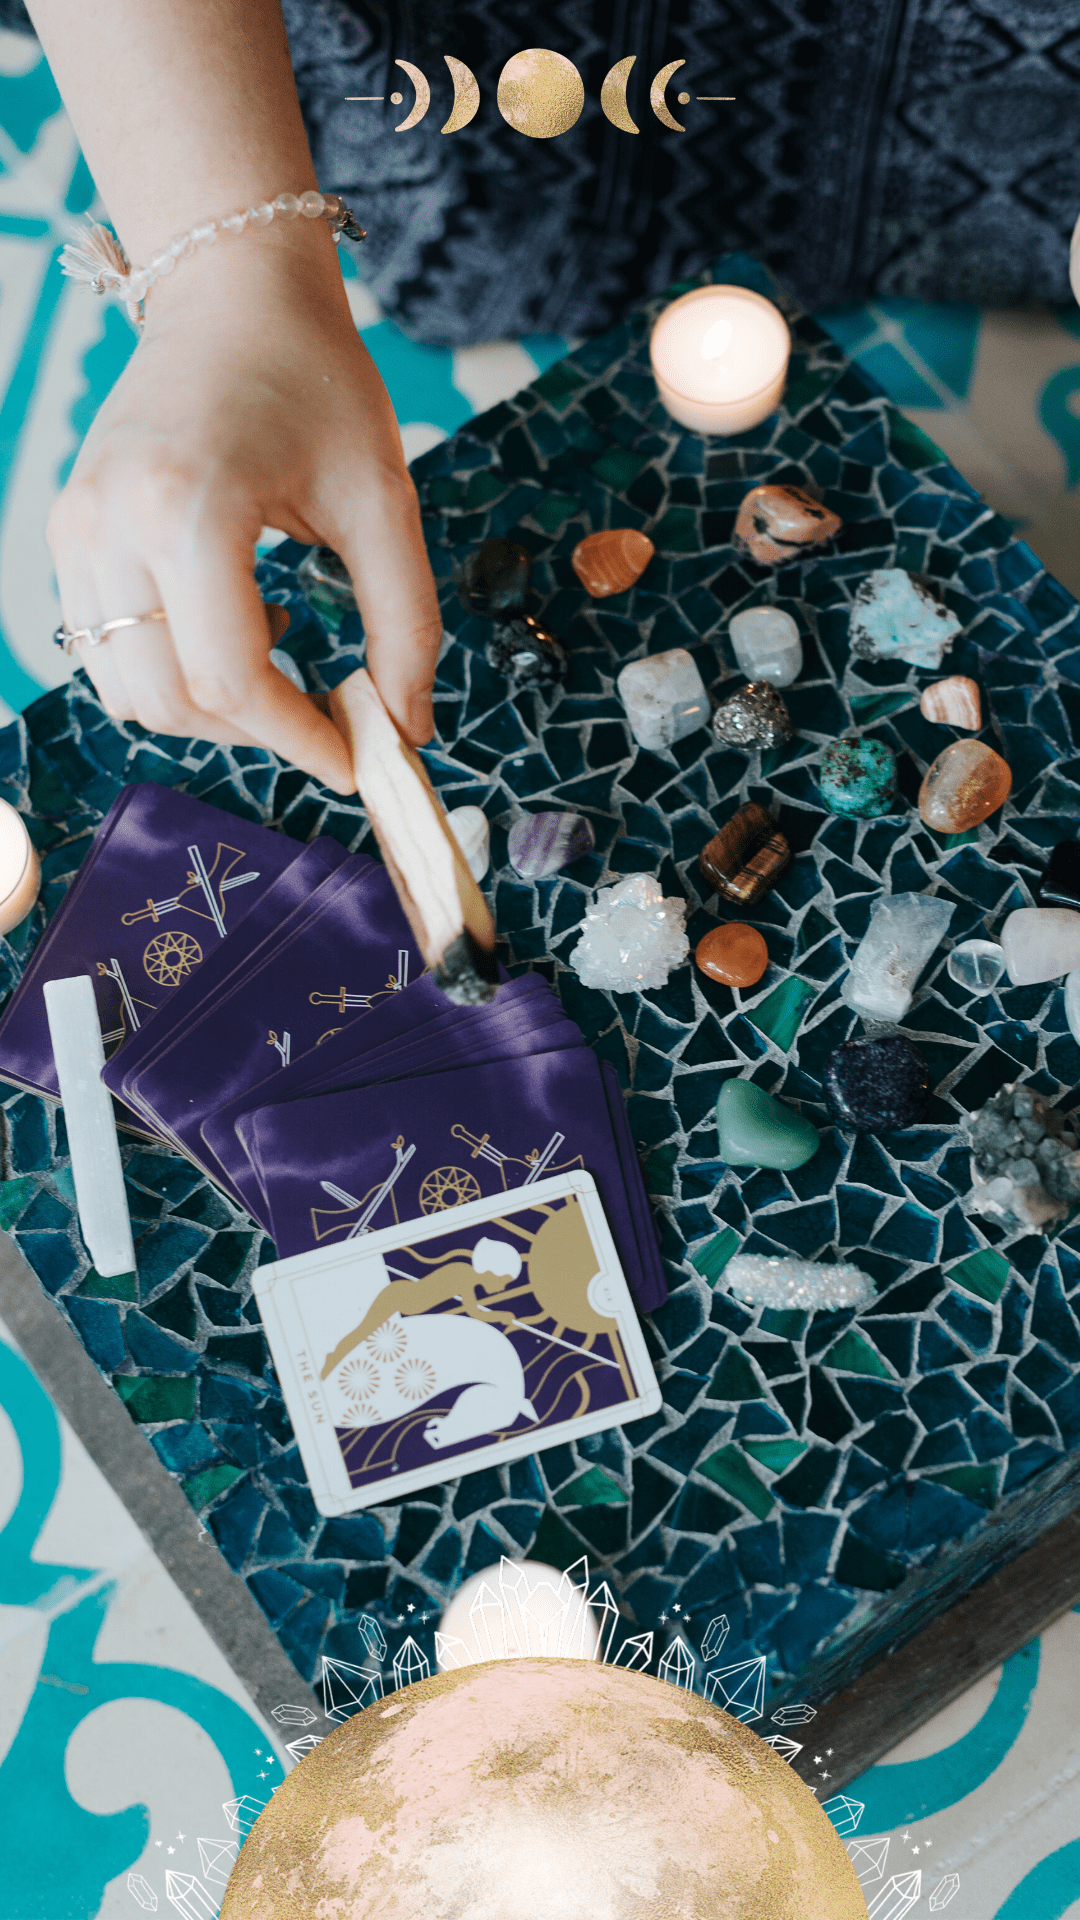 Working with Crystals and the Major Arcana of the Tarot